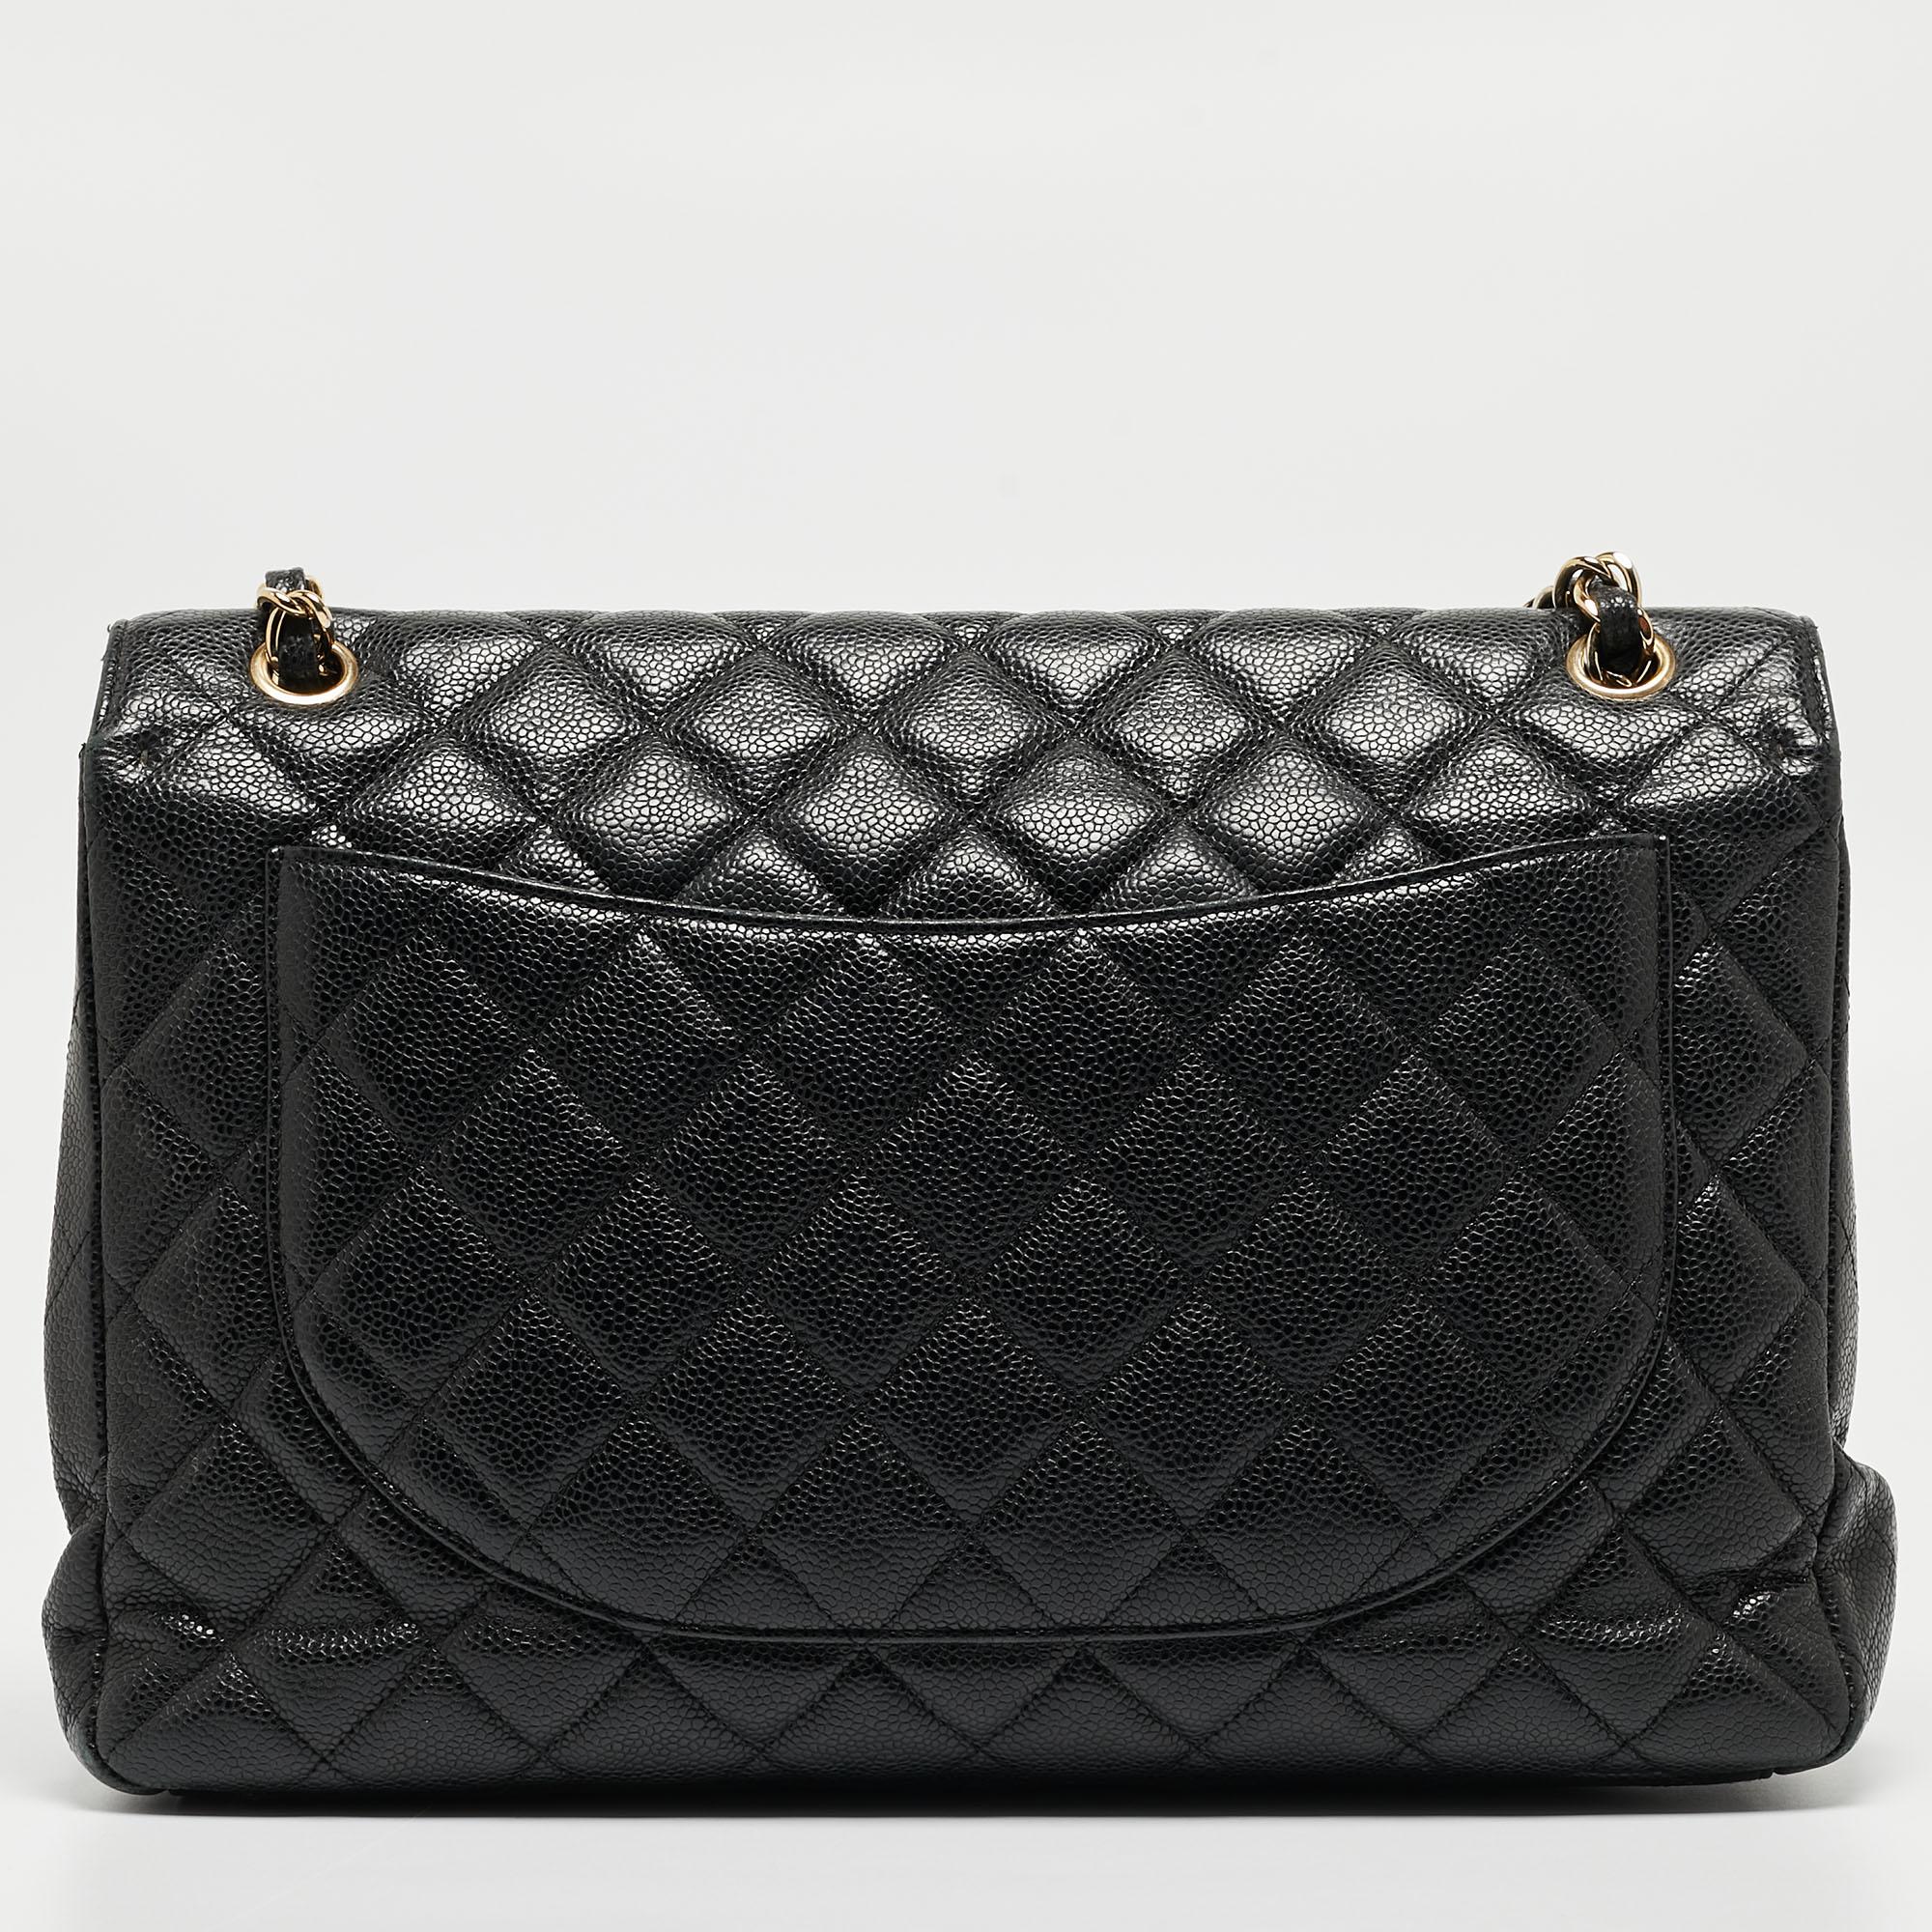 Reimagined season after season, the classic designs from Chanel manages to retain their classic glamour and noteworthy silhouettes. From one of the most celebrated collections, this Single Flap bag is enriched with historic details and functional